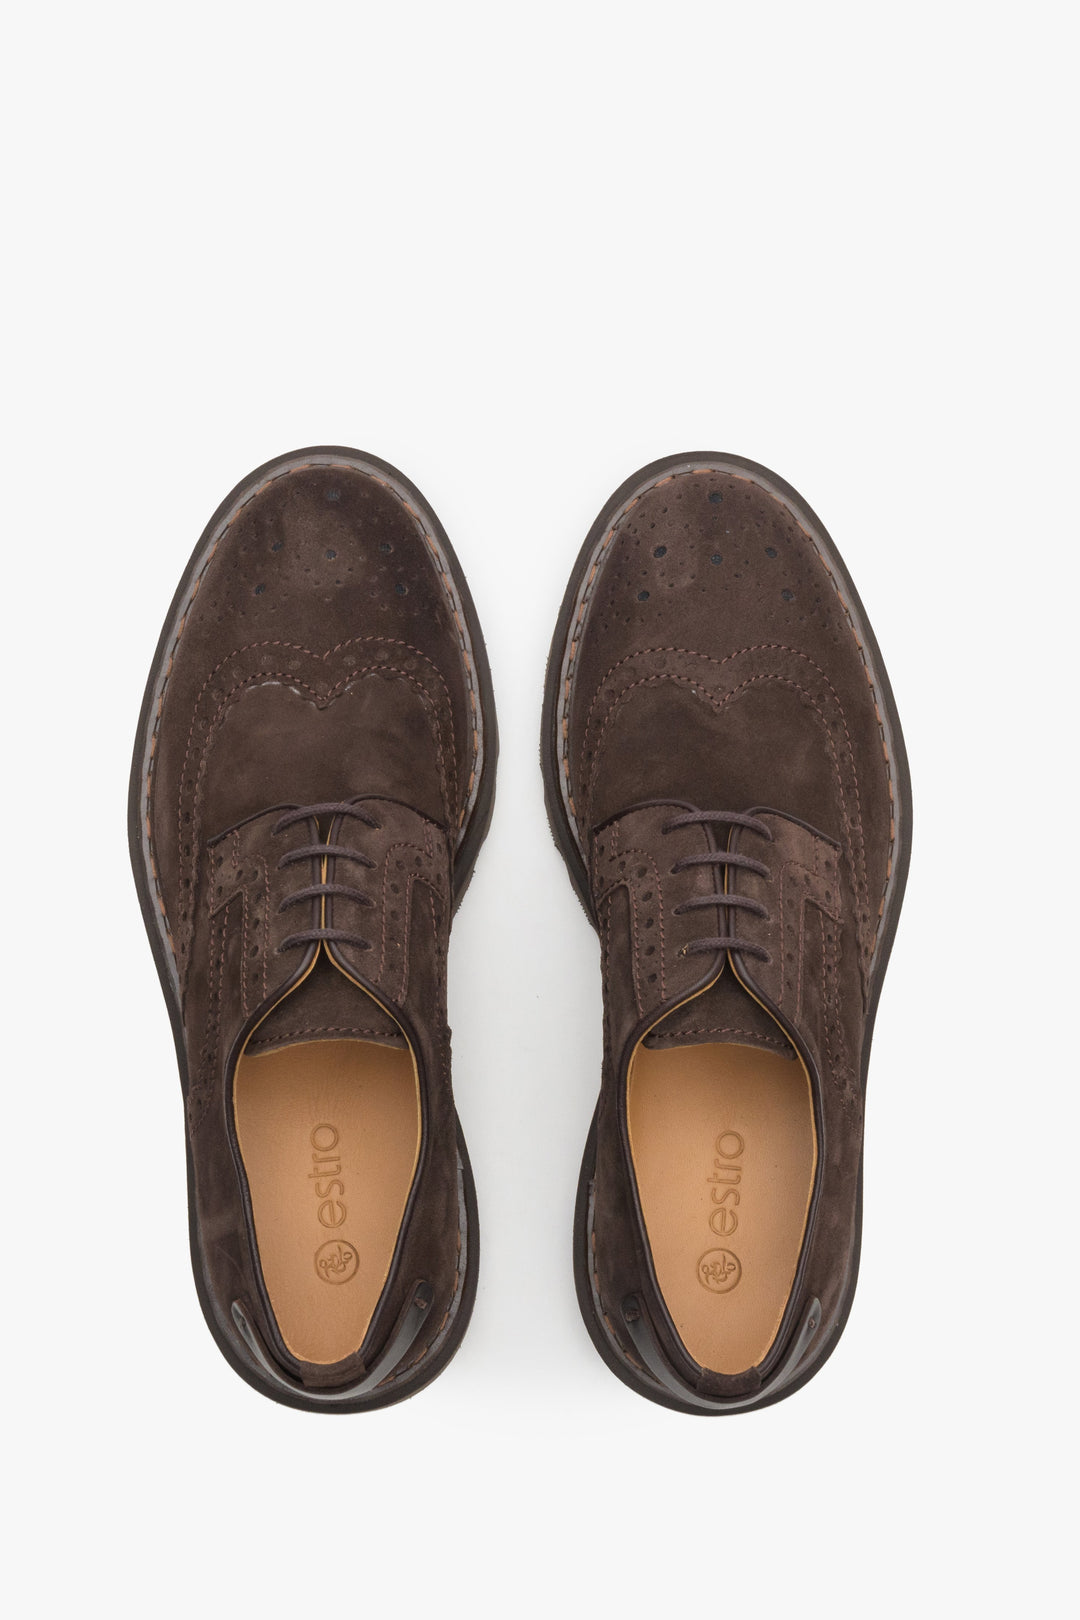 Dark brown men's Oxford shoes in natural suede by Estro - top view presentation of the model.